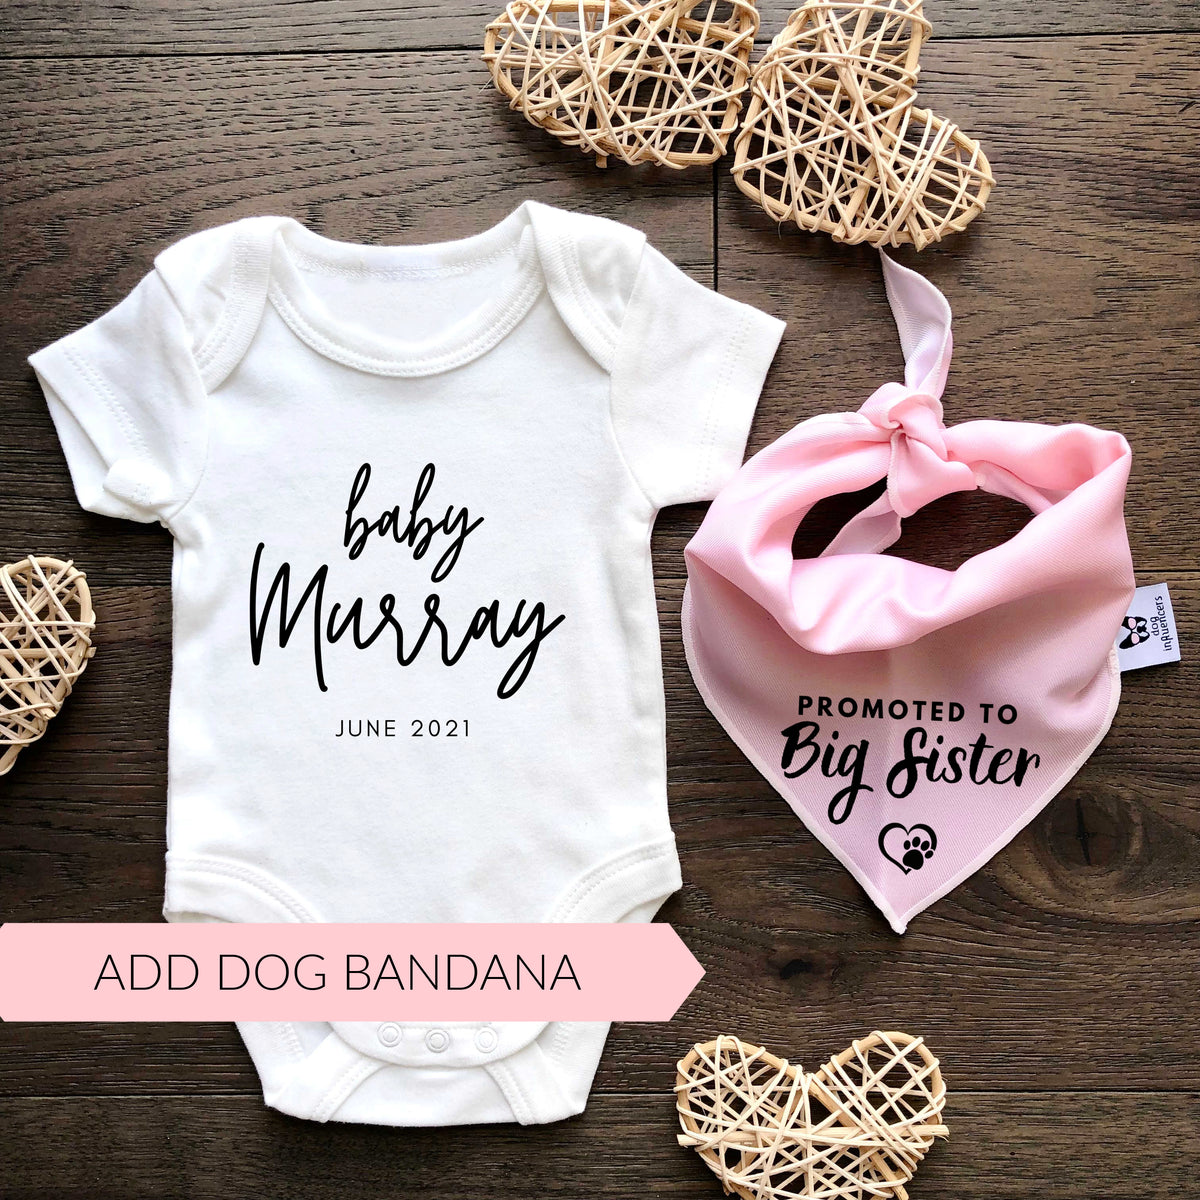 Pregnancy Announcement Baby Onesie - Custom Name and Due Date